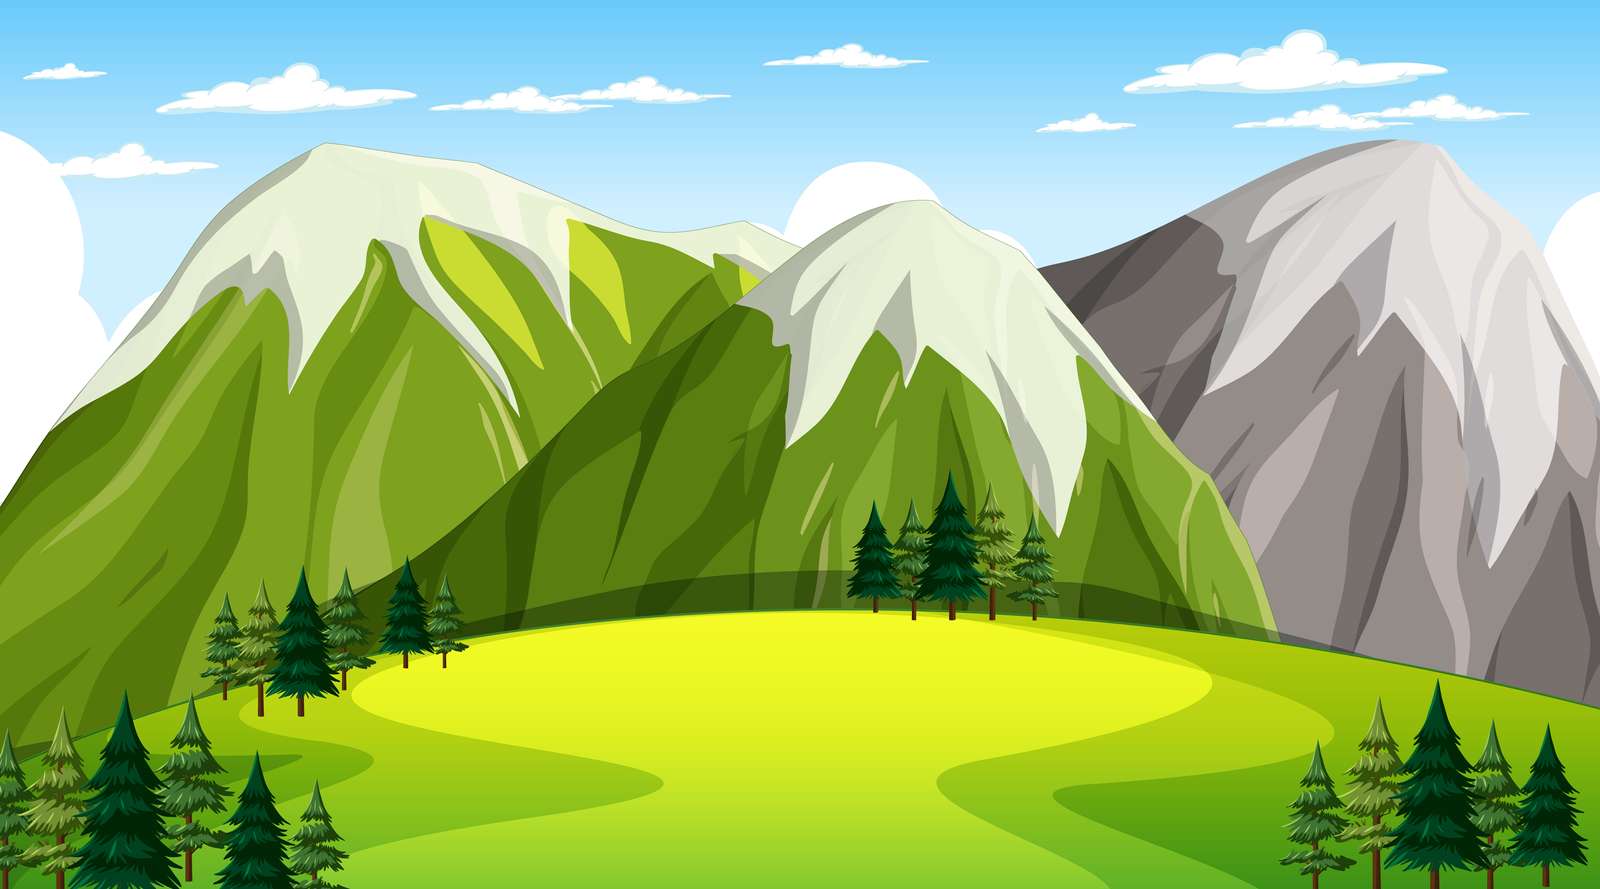 Valley Clip art puzzle online from photo